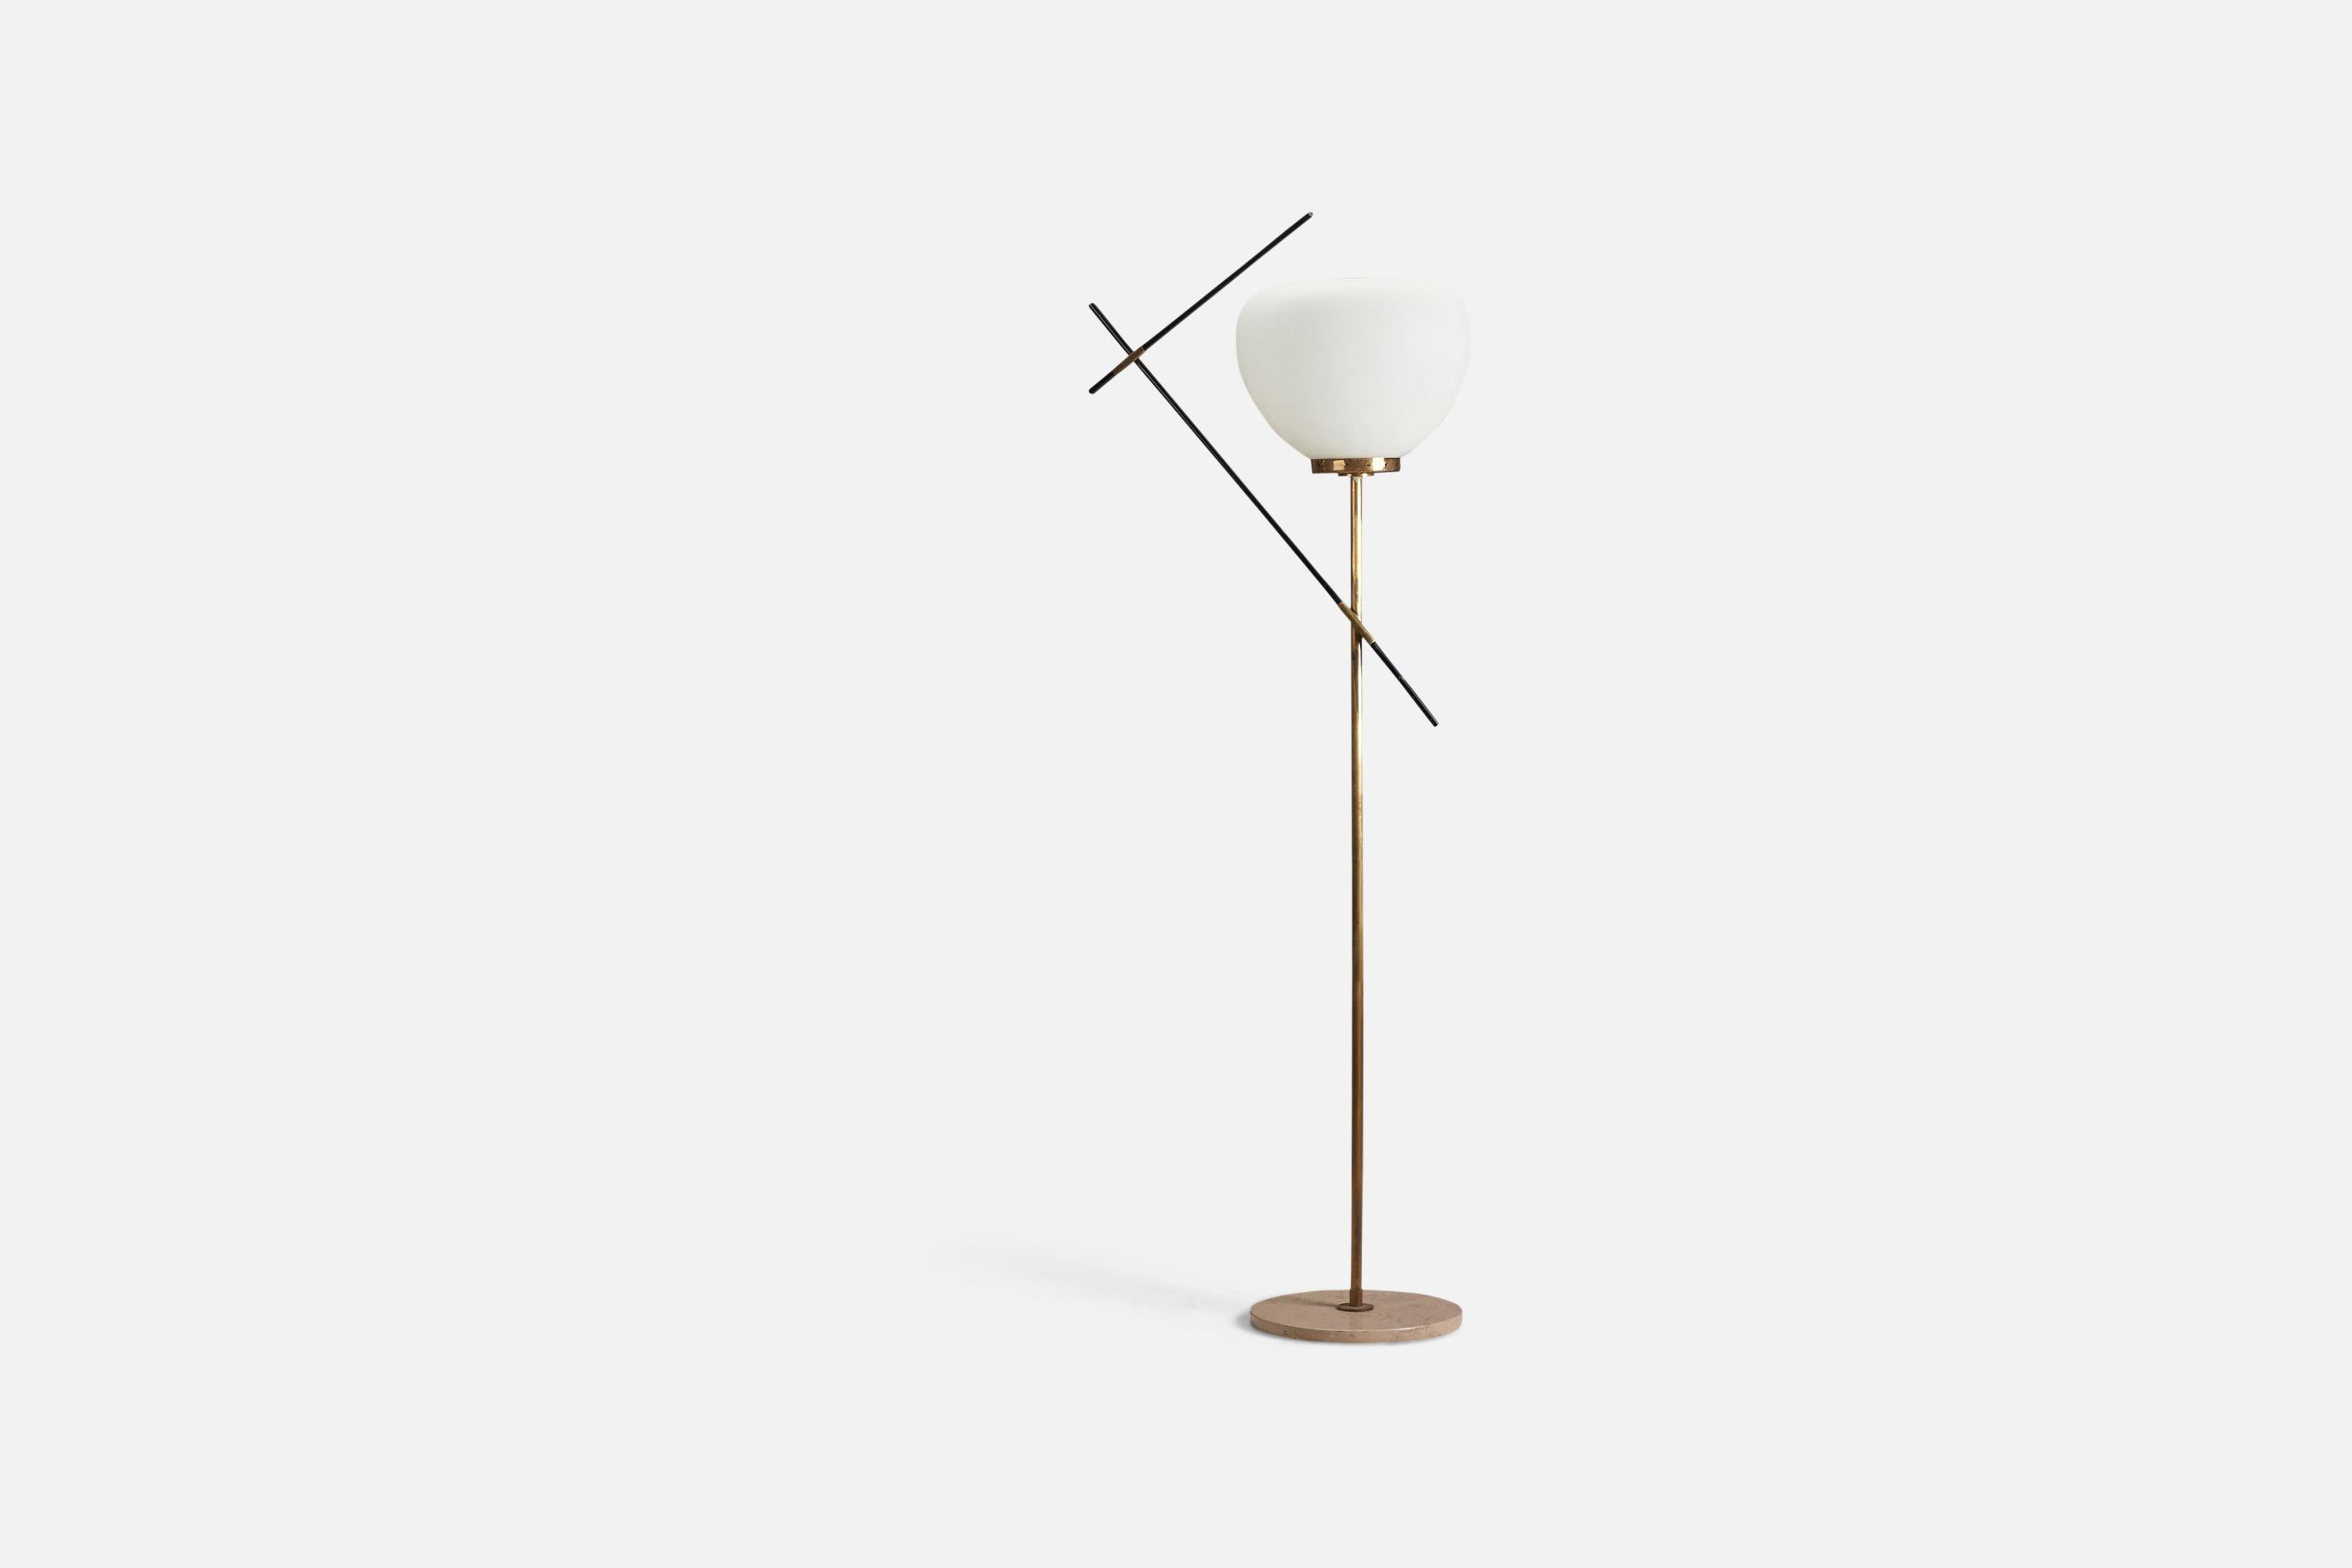 A brass, metal, milk glass, travertine floor lamp designed and produced by Stilnovo, Italy, 1950s.

Socket takes standard E-26 medium base bulb.

There is no maximum wattage stated on the fixture.